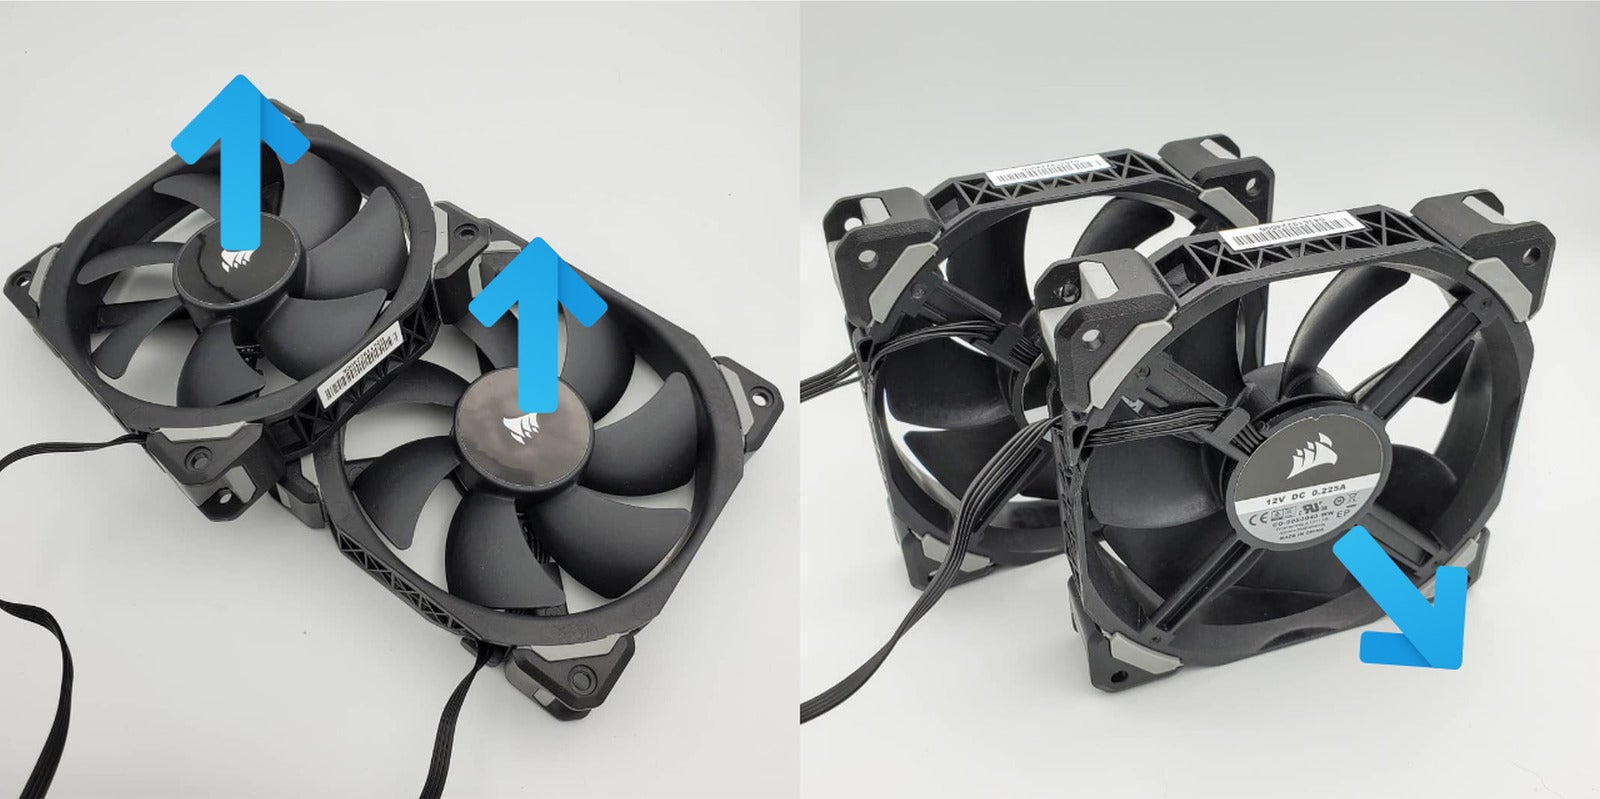 How to set up your PC's fans for maximum system cooling - PC World New